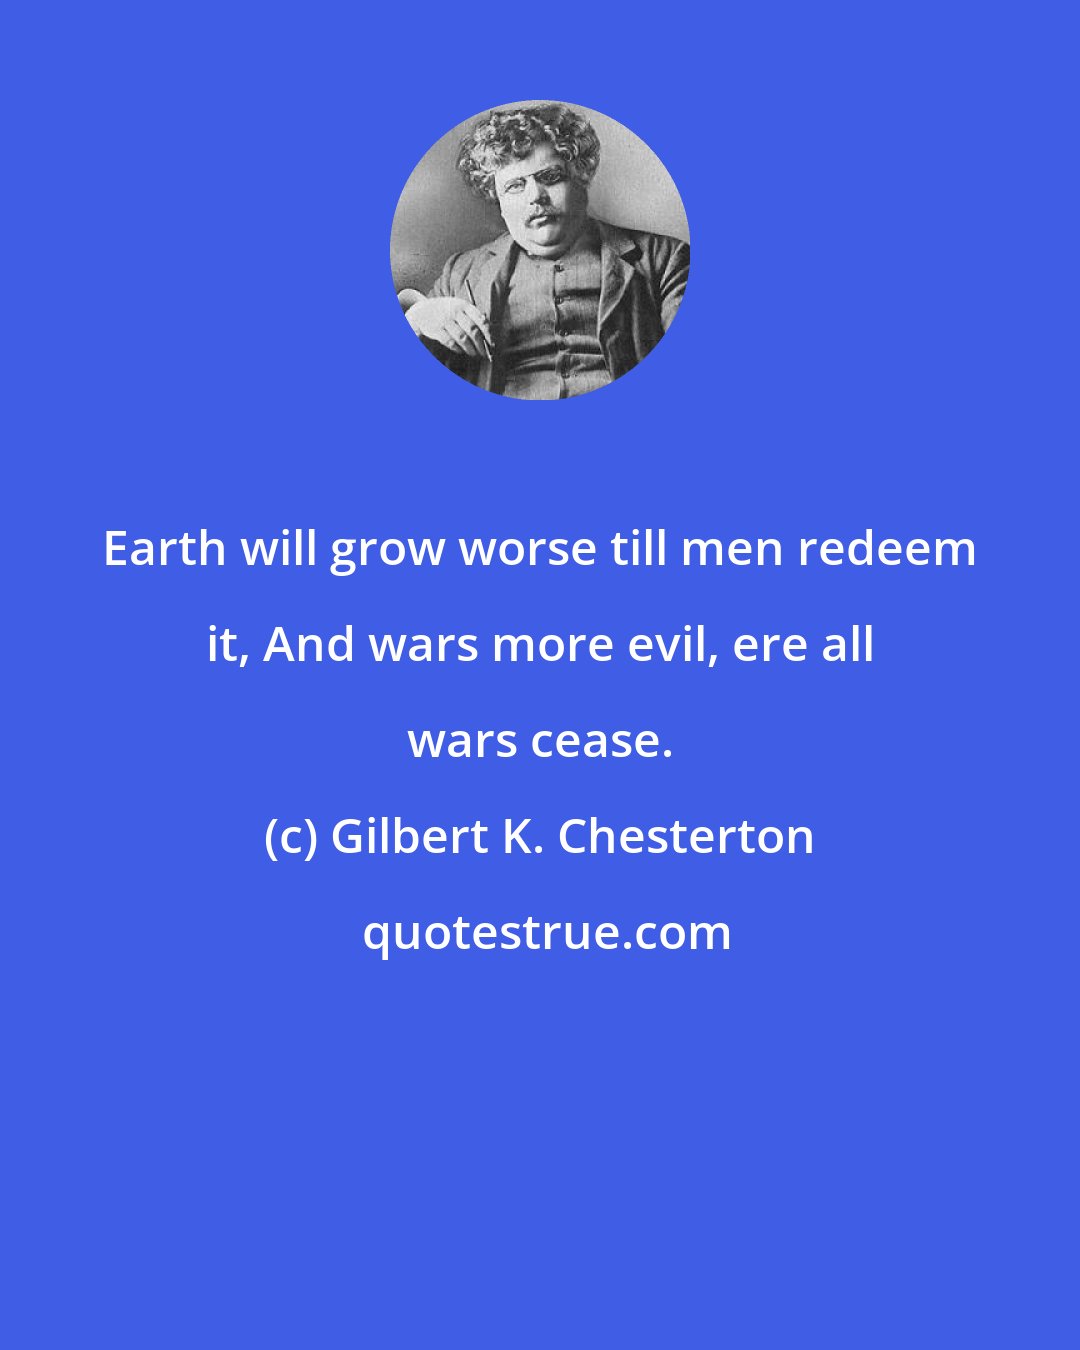 Gilbert K. Chesterton: Earth will grow worse till men redeem it, And wars more evil, ere all wars cease.